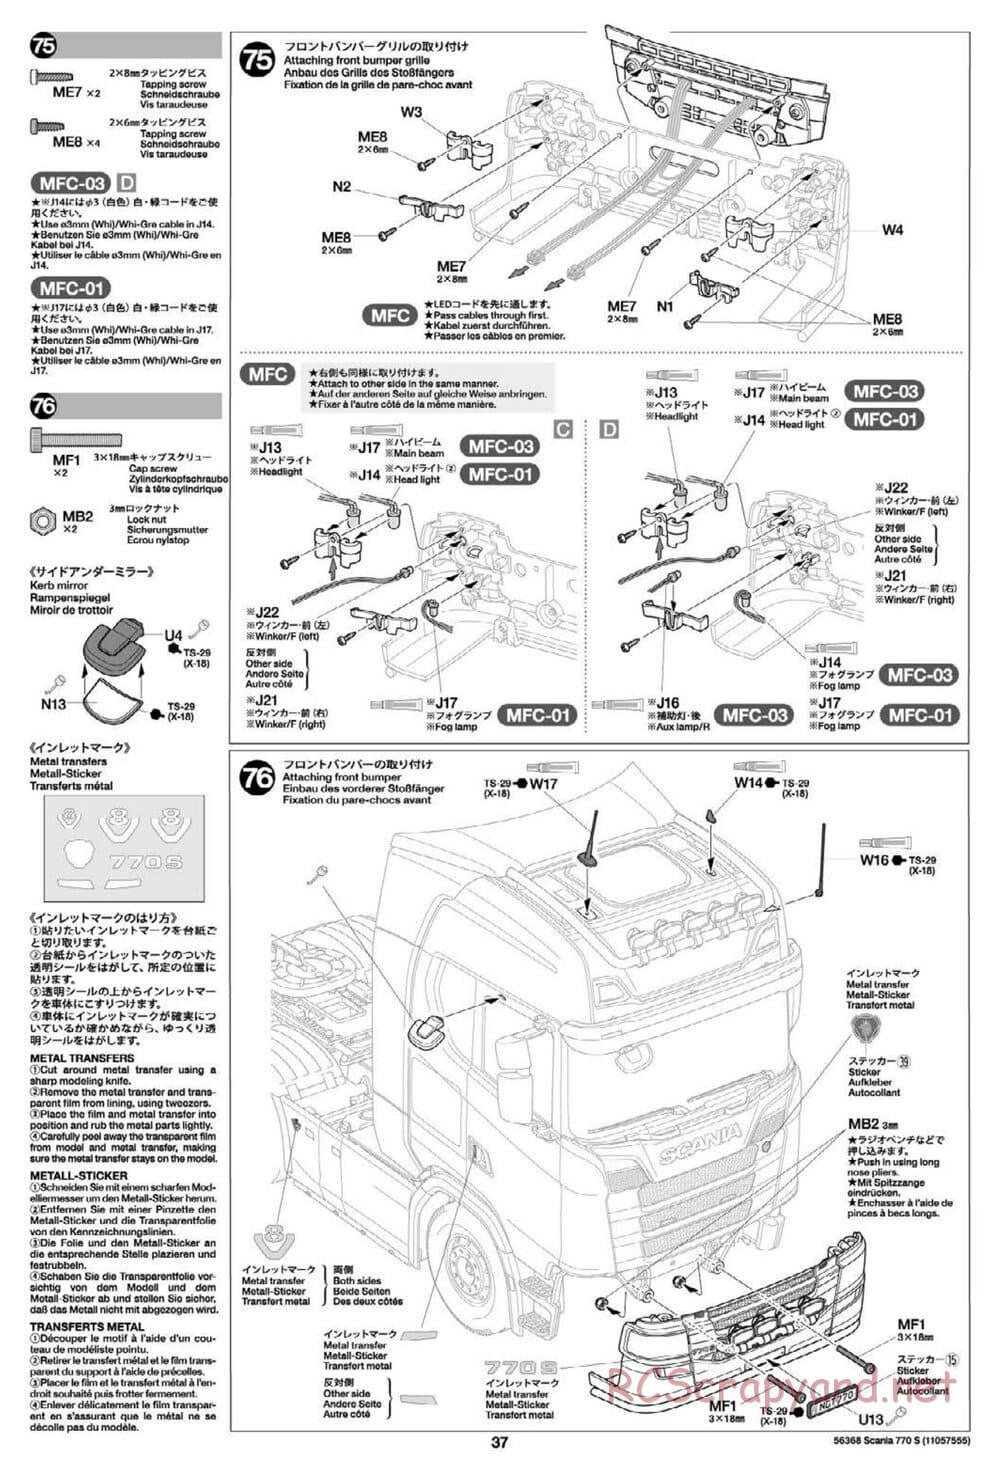 Tamiya - Scania 770S 6x4 Tractor Truck Chassis - Manual - Page 37